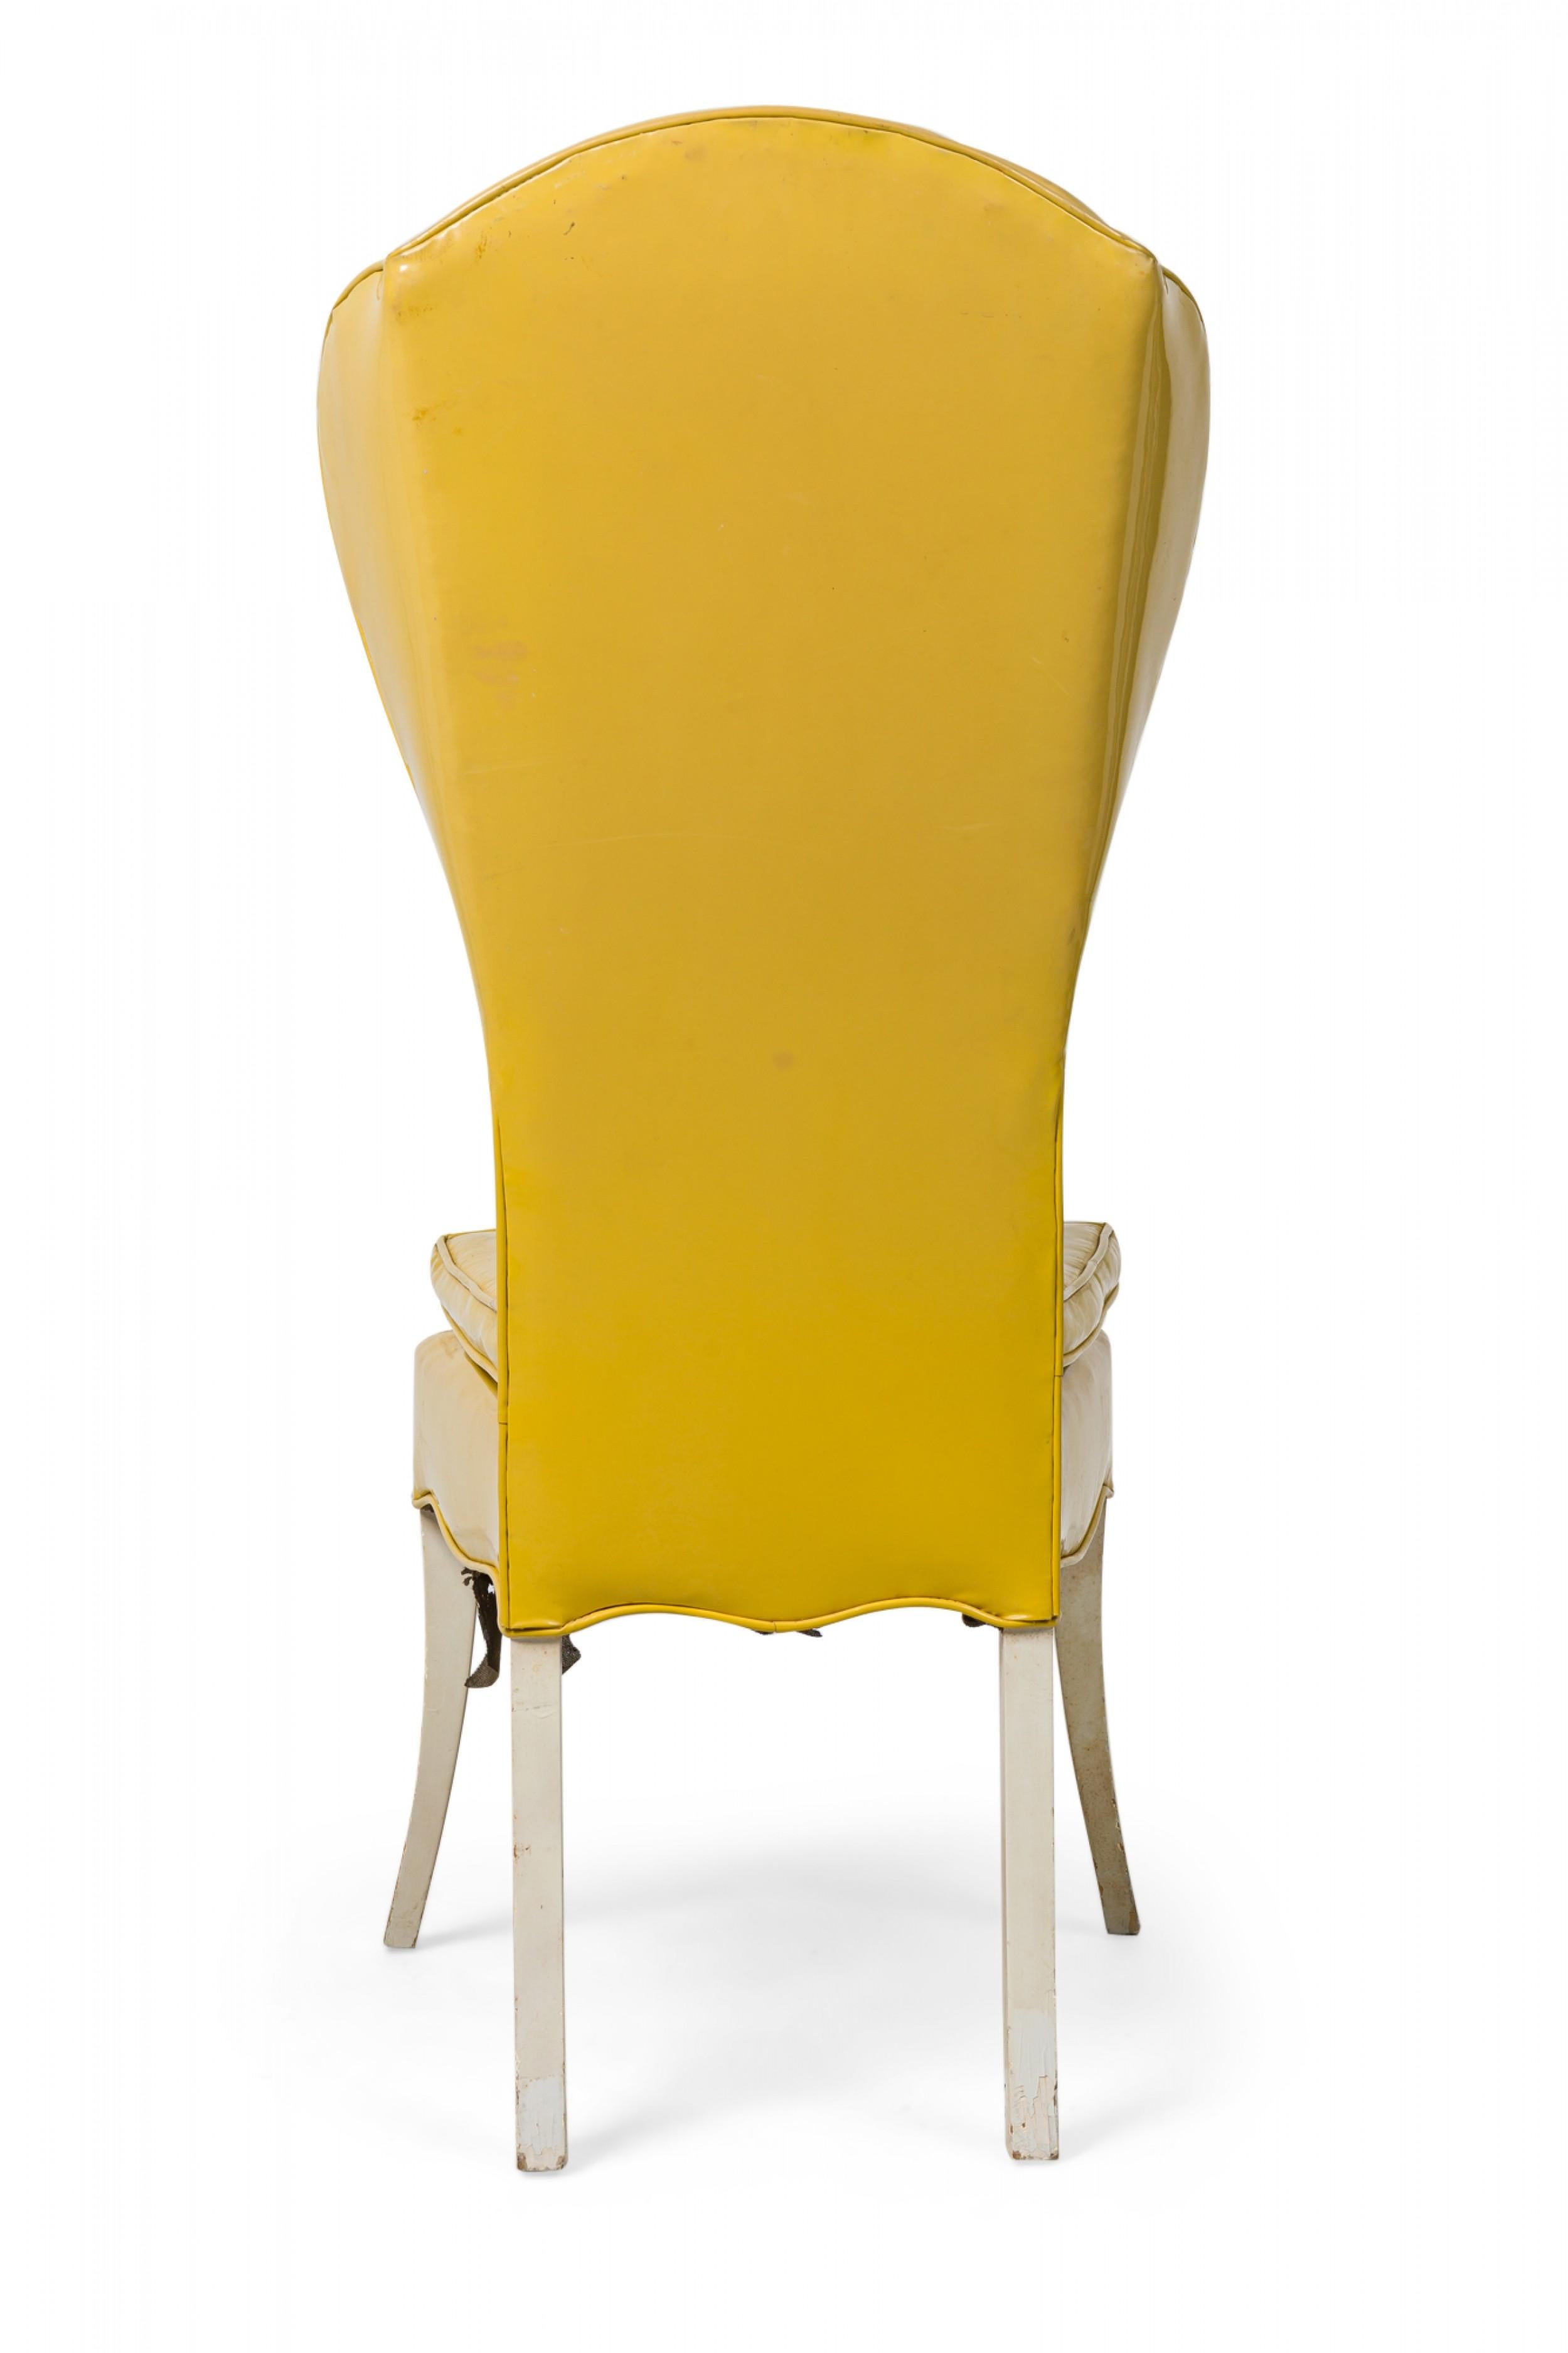 Painted Tommi Parzinger Midcentury American Yellow Vinyl Upholstered Wing Chair For Sale